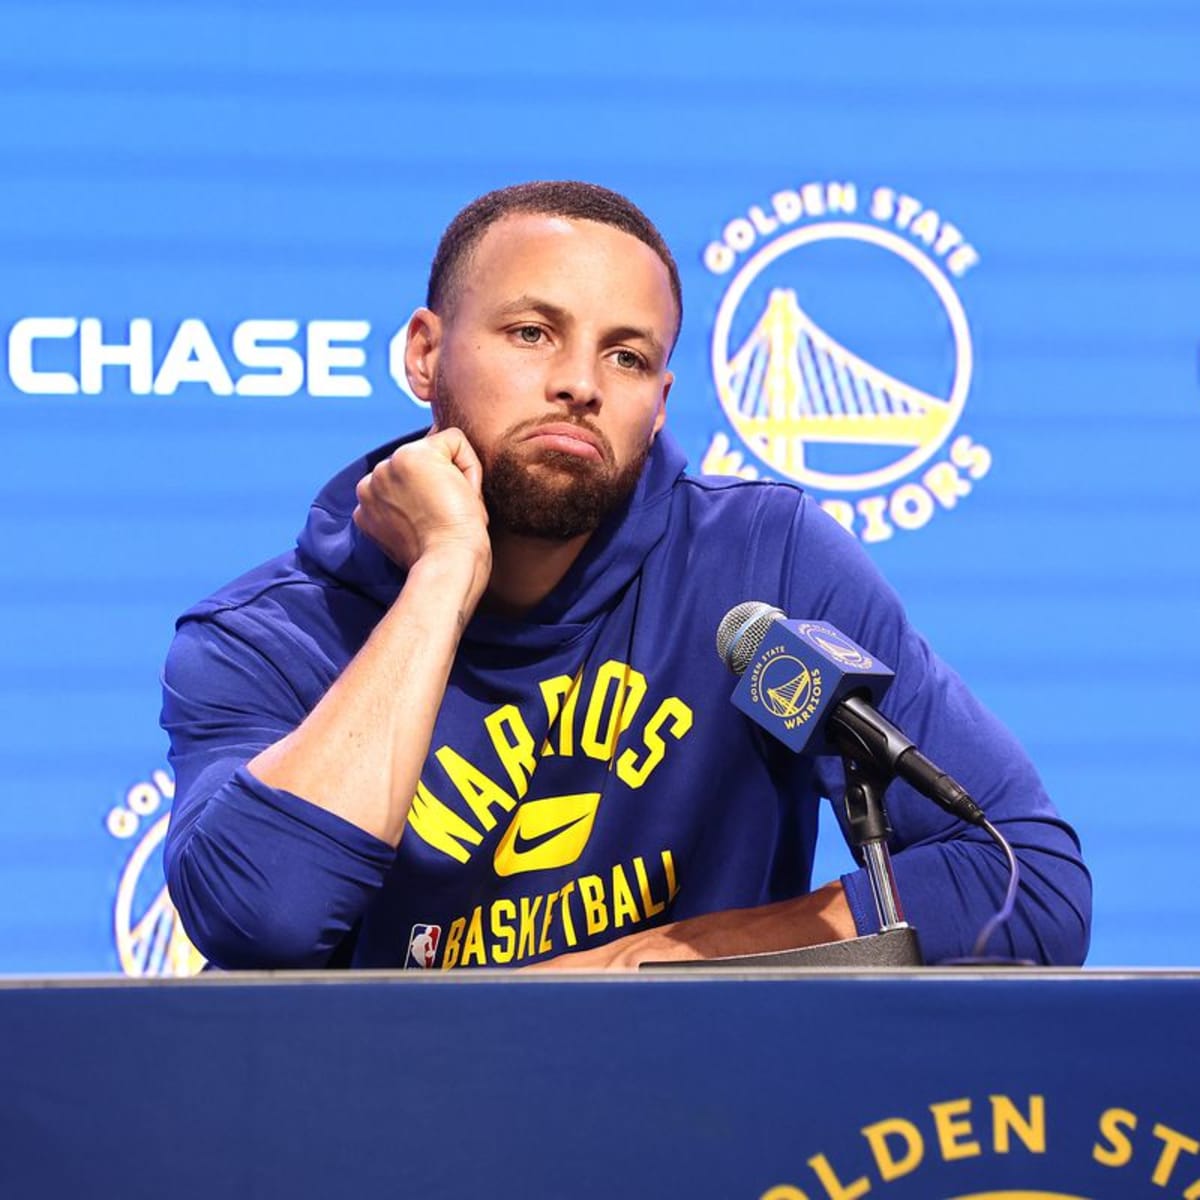 To keep Steph Curry, Warriors set to breach mindboggling $400